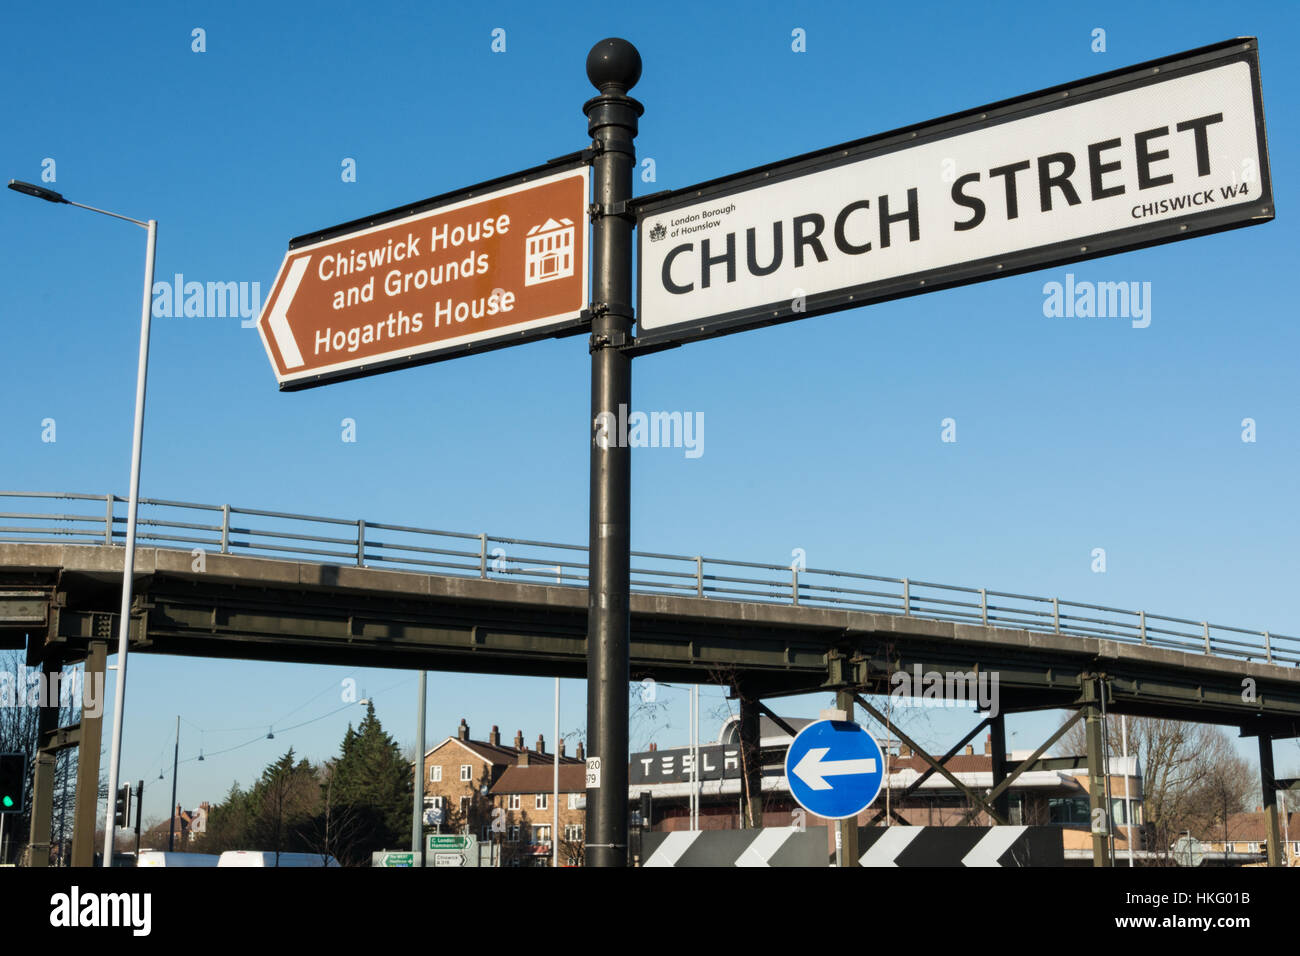 Chiswick House street sign in front of The Hogarth Roundabout and flyover in Chiswick, SW London. Stock Photo